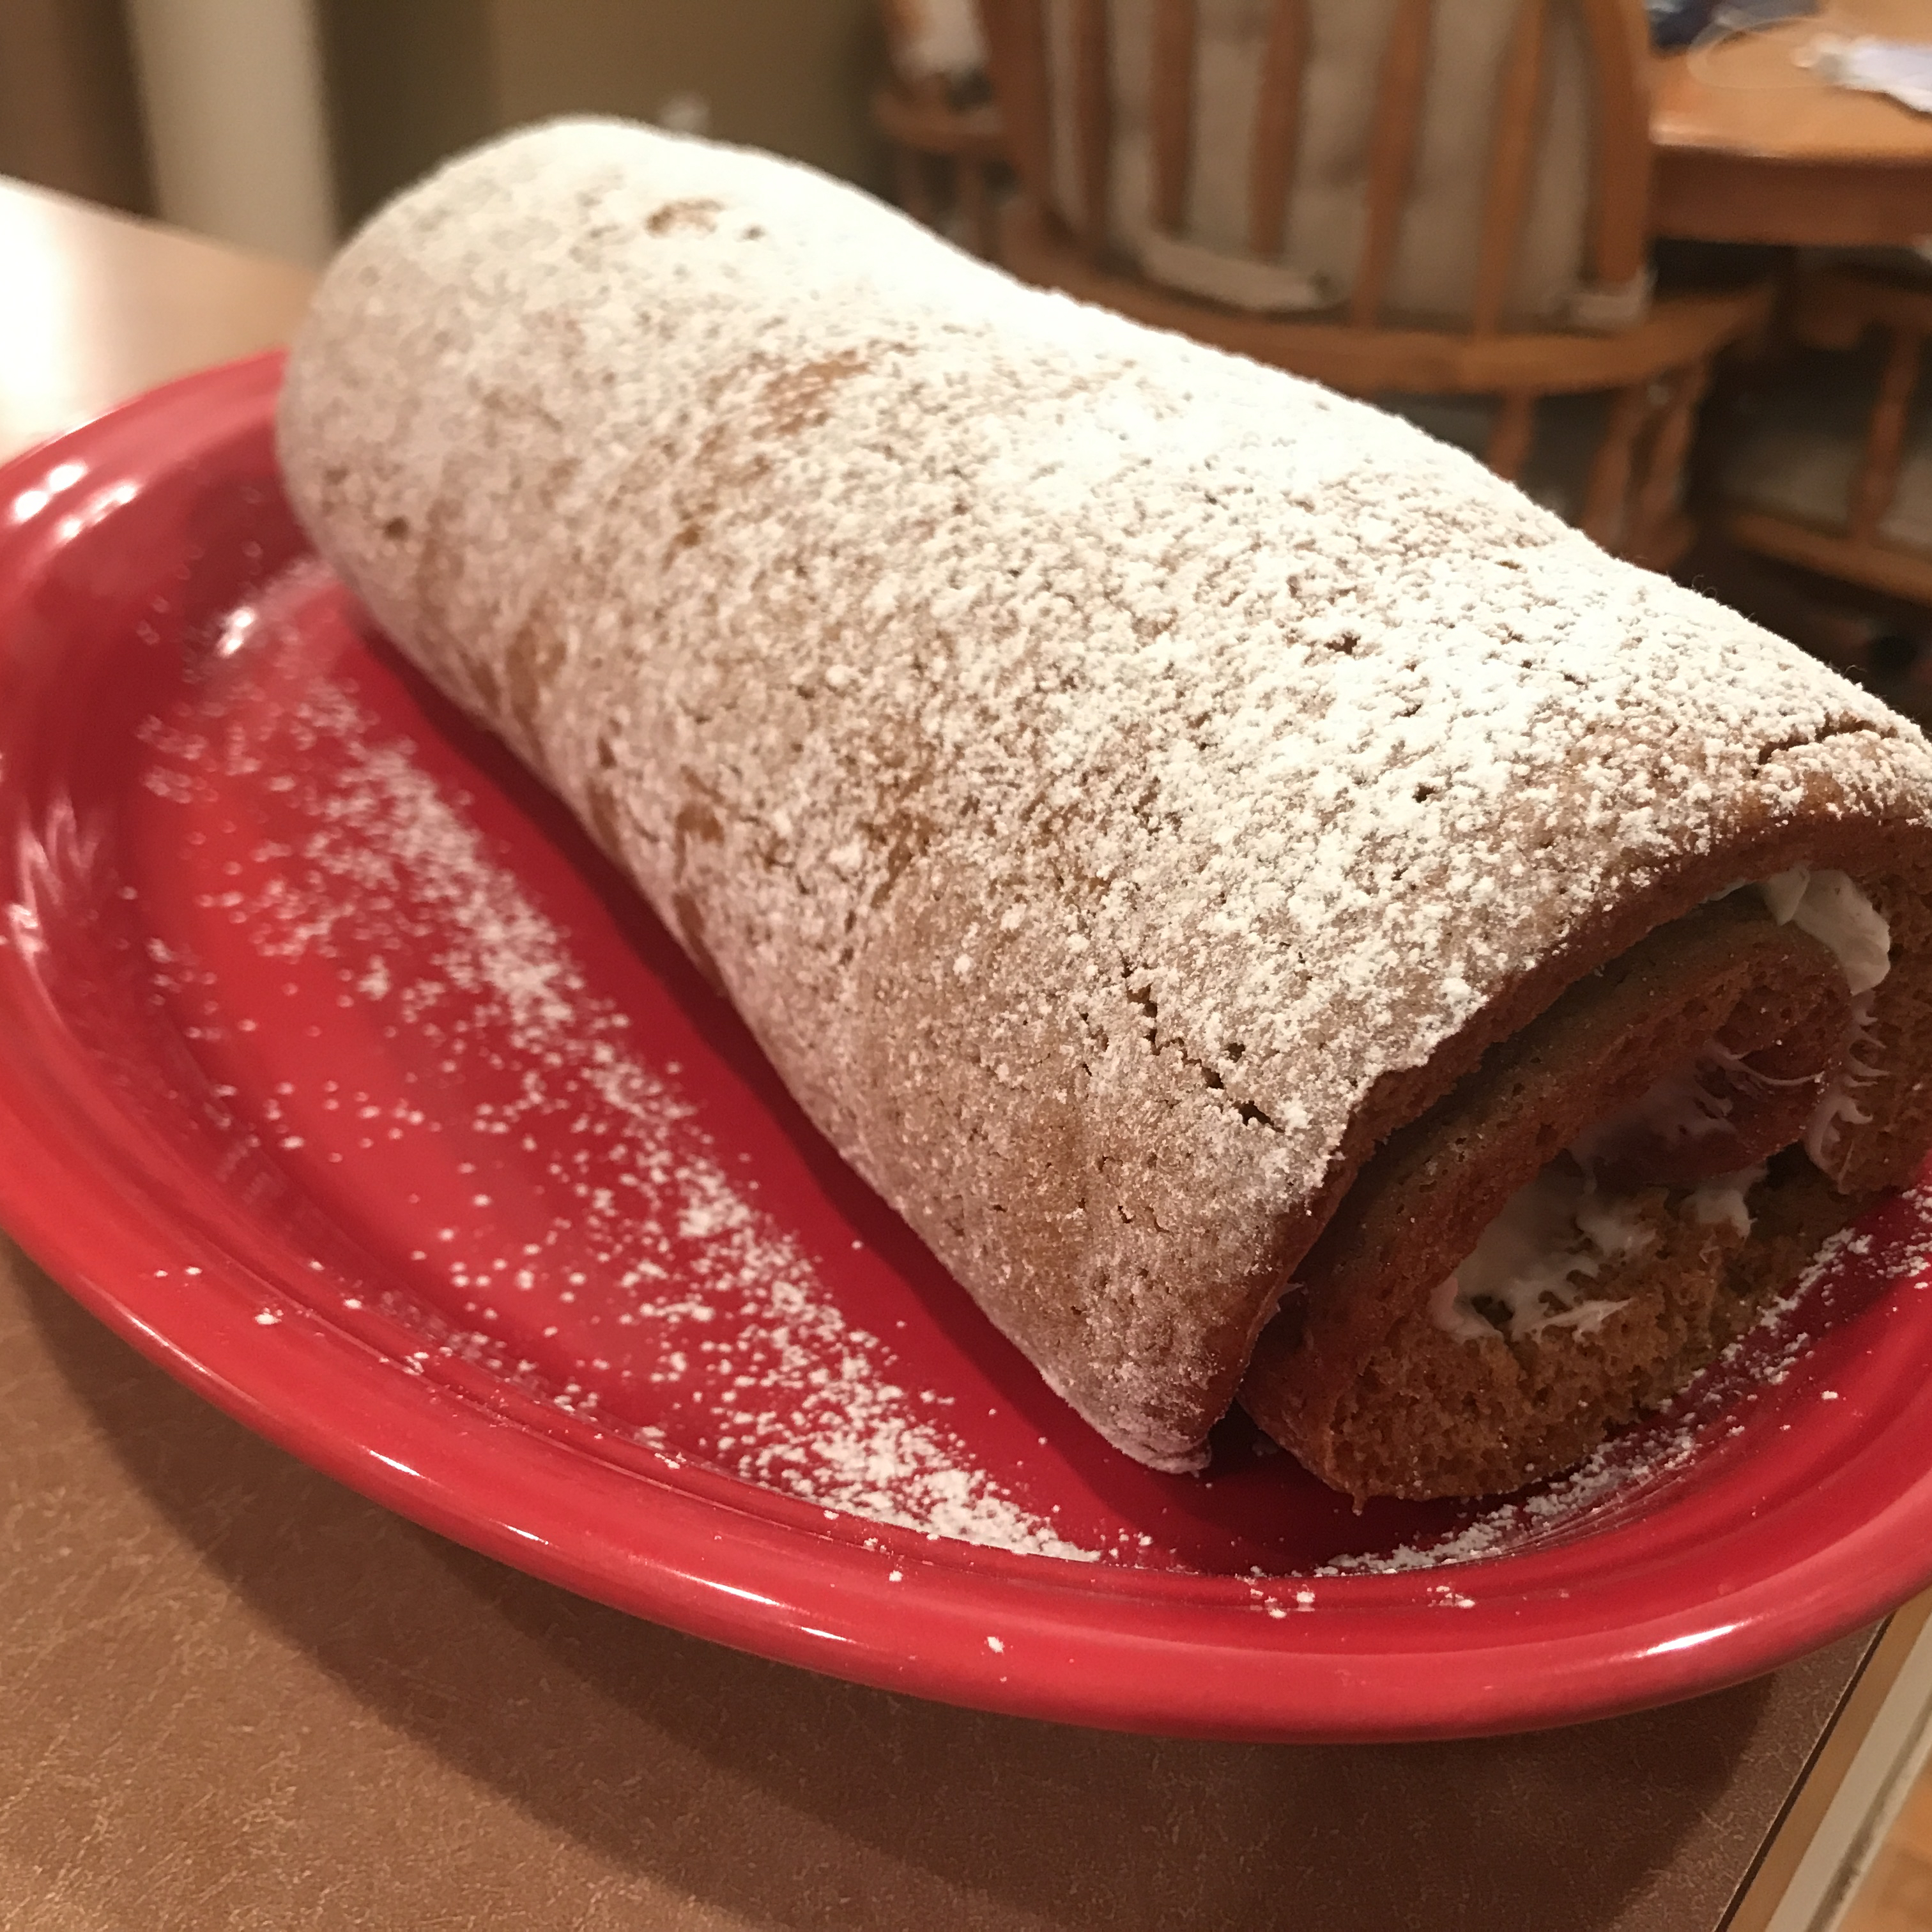 Libby's&reg; Pumpkin Roll with Cream Cheese Filling 